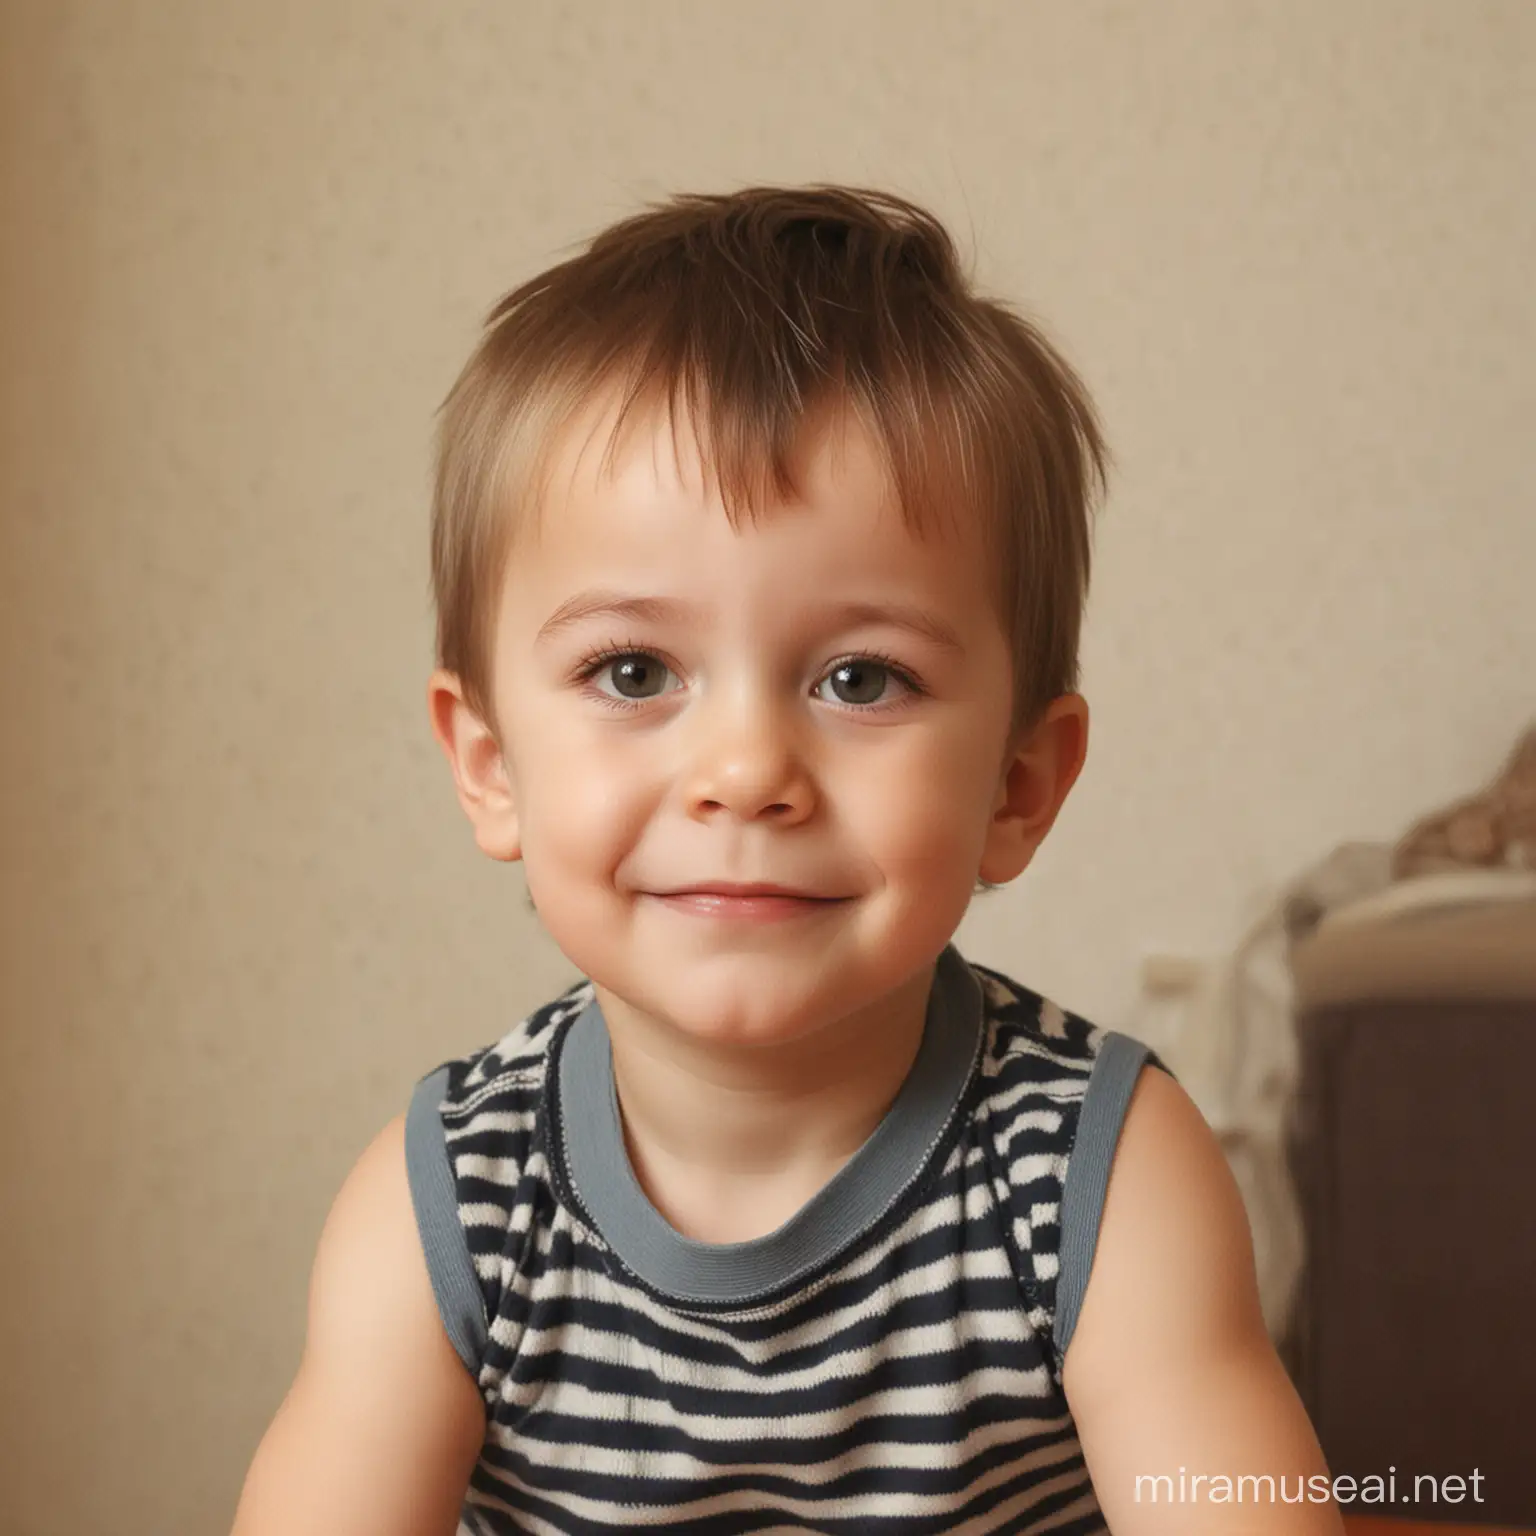 A little boy around the age of three years old. Its a picture taken at home in private.